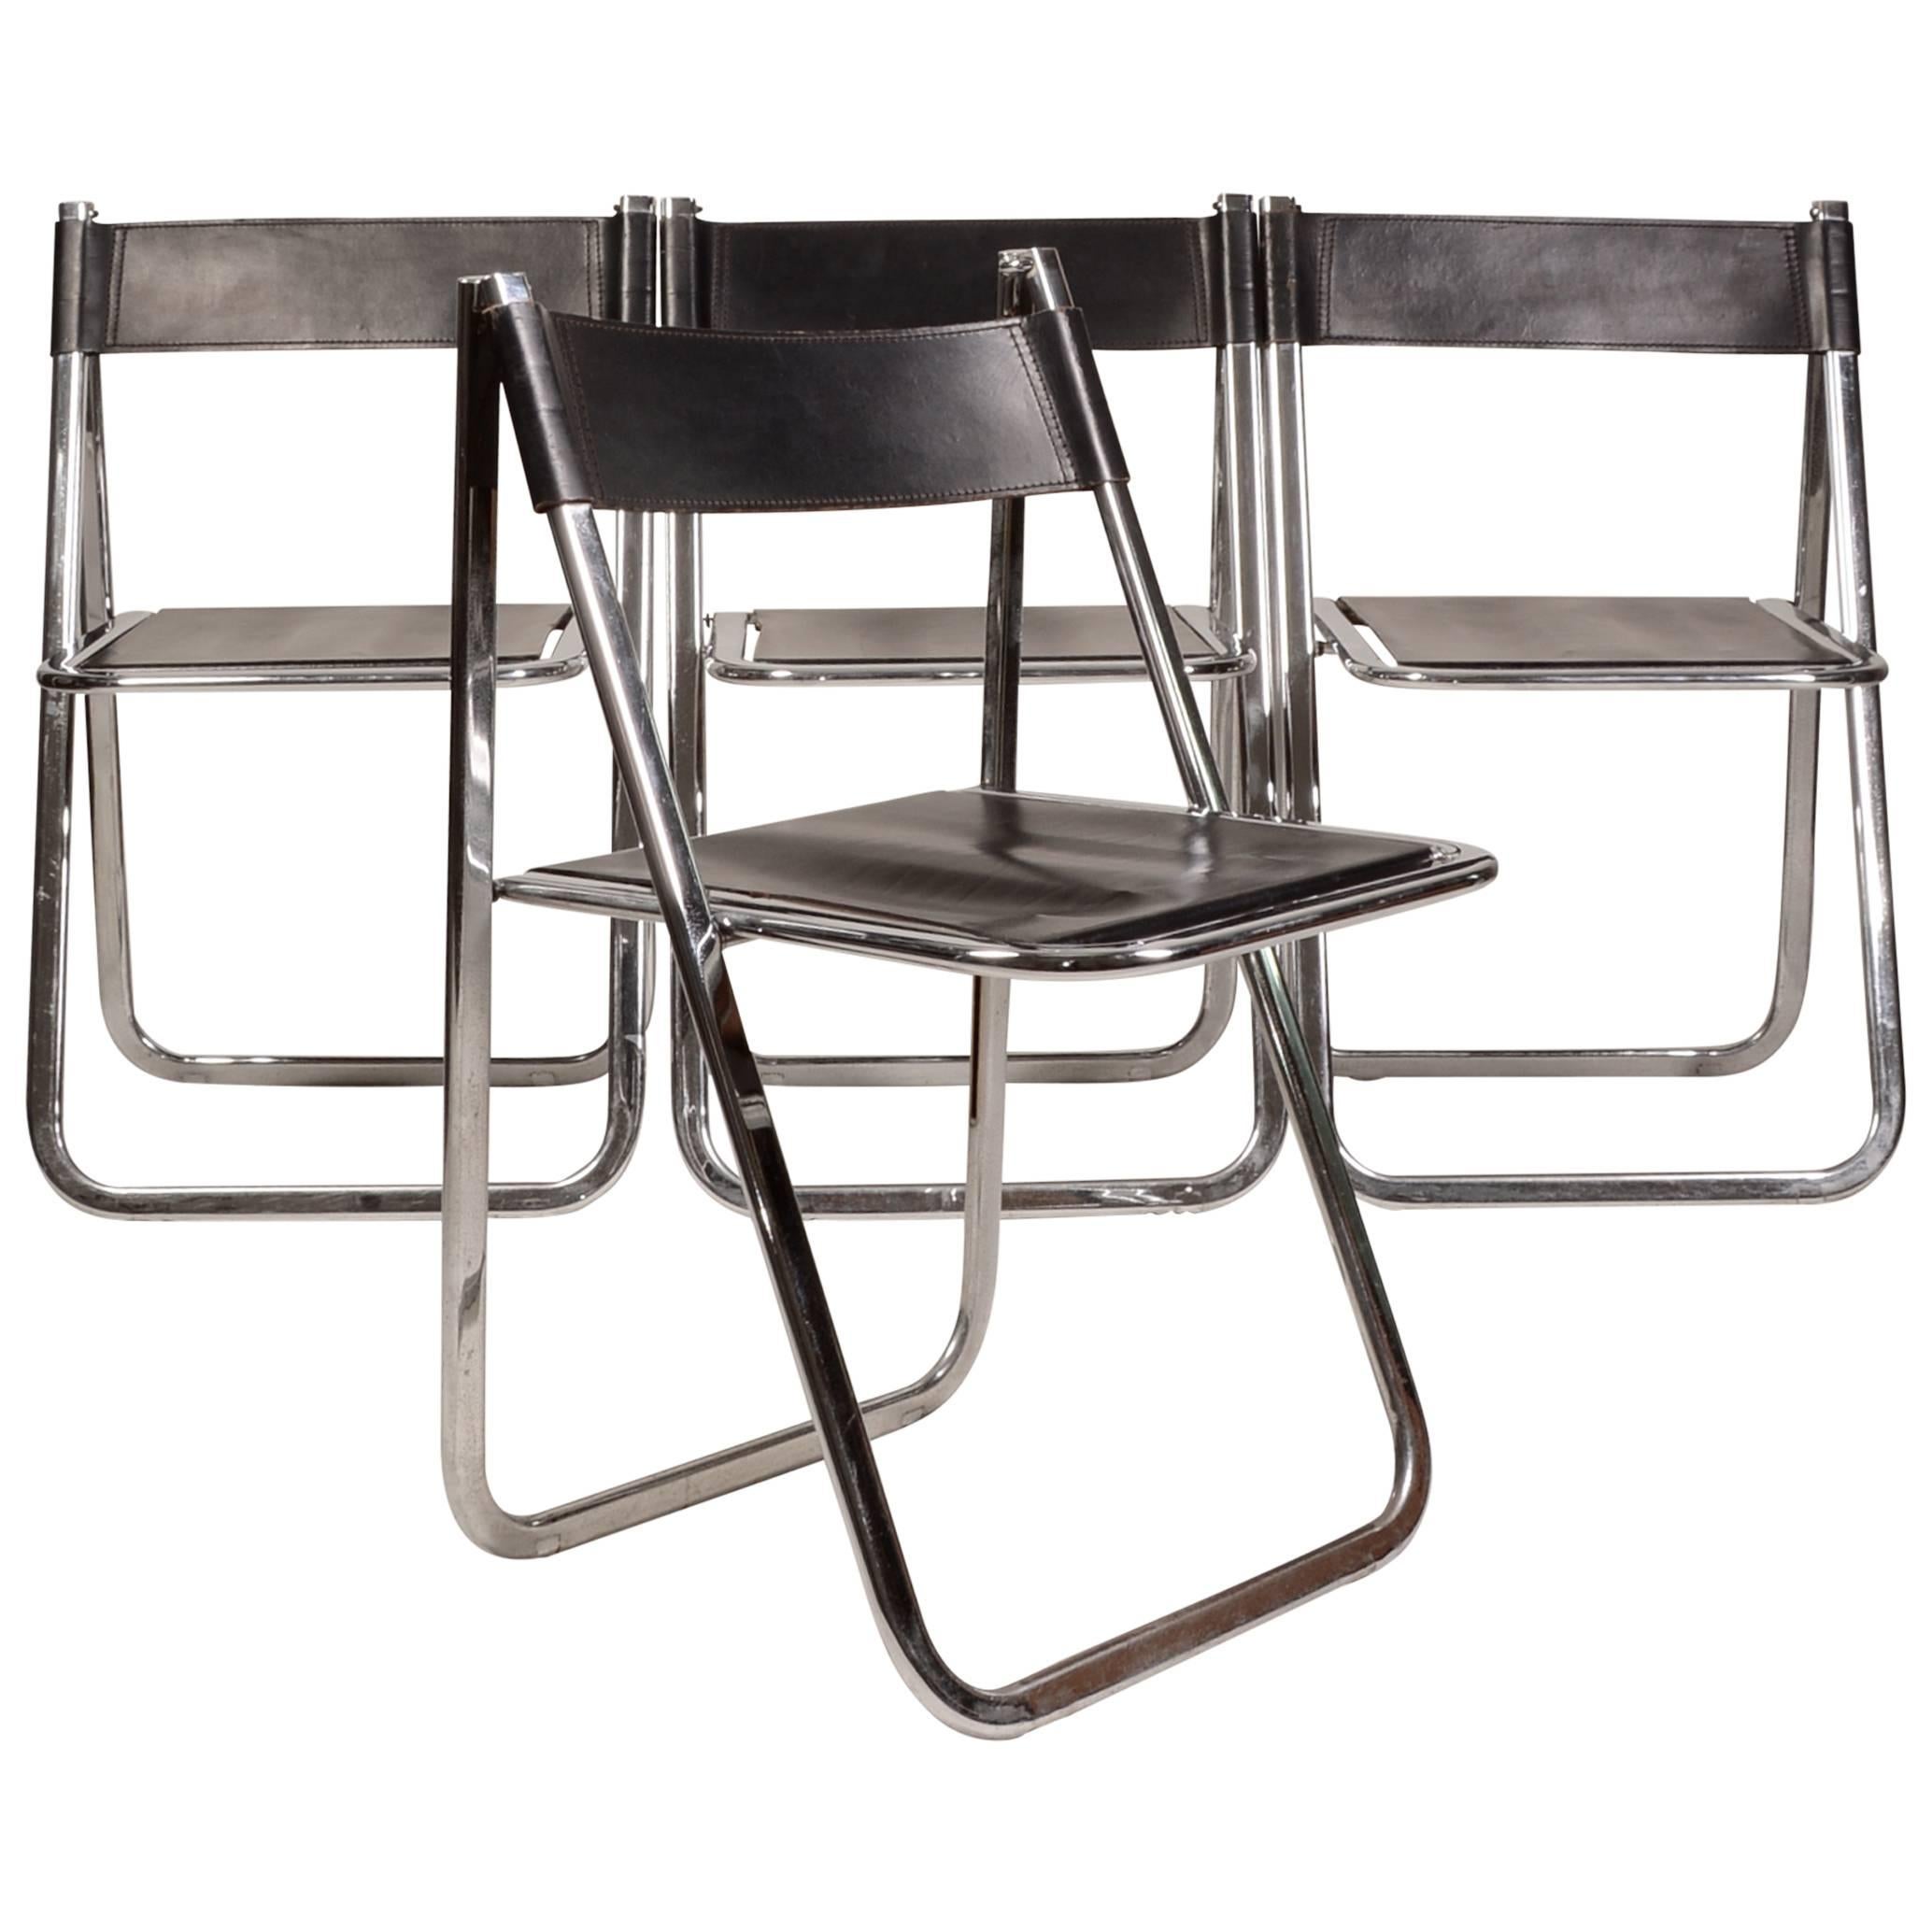 Vintage 1970 Tamara Model Folding Leather and Chrome Chairs by Arrben 